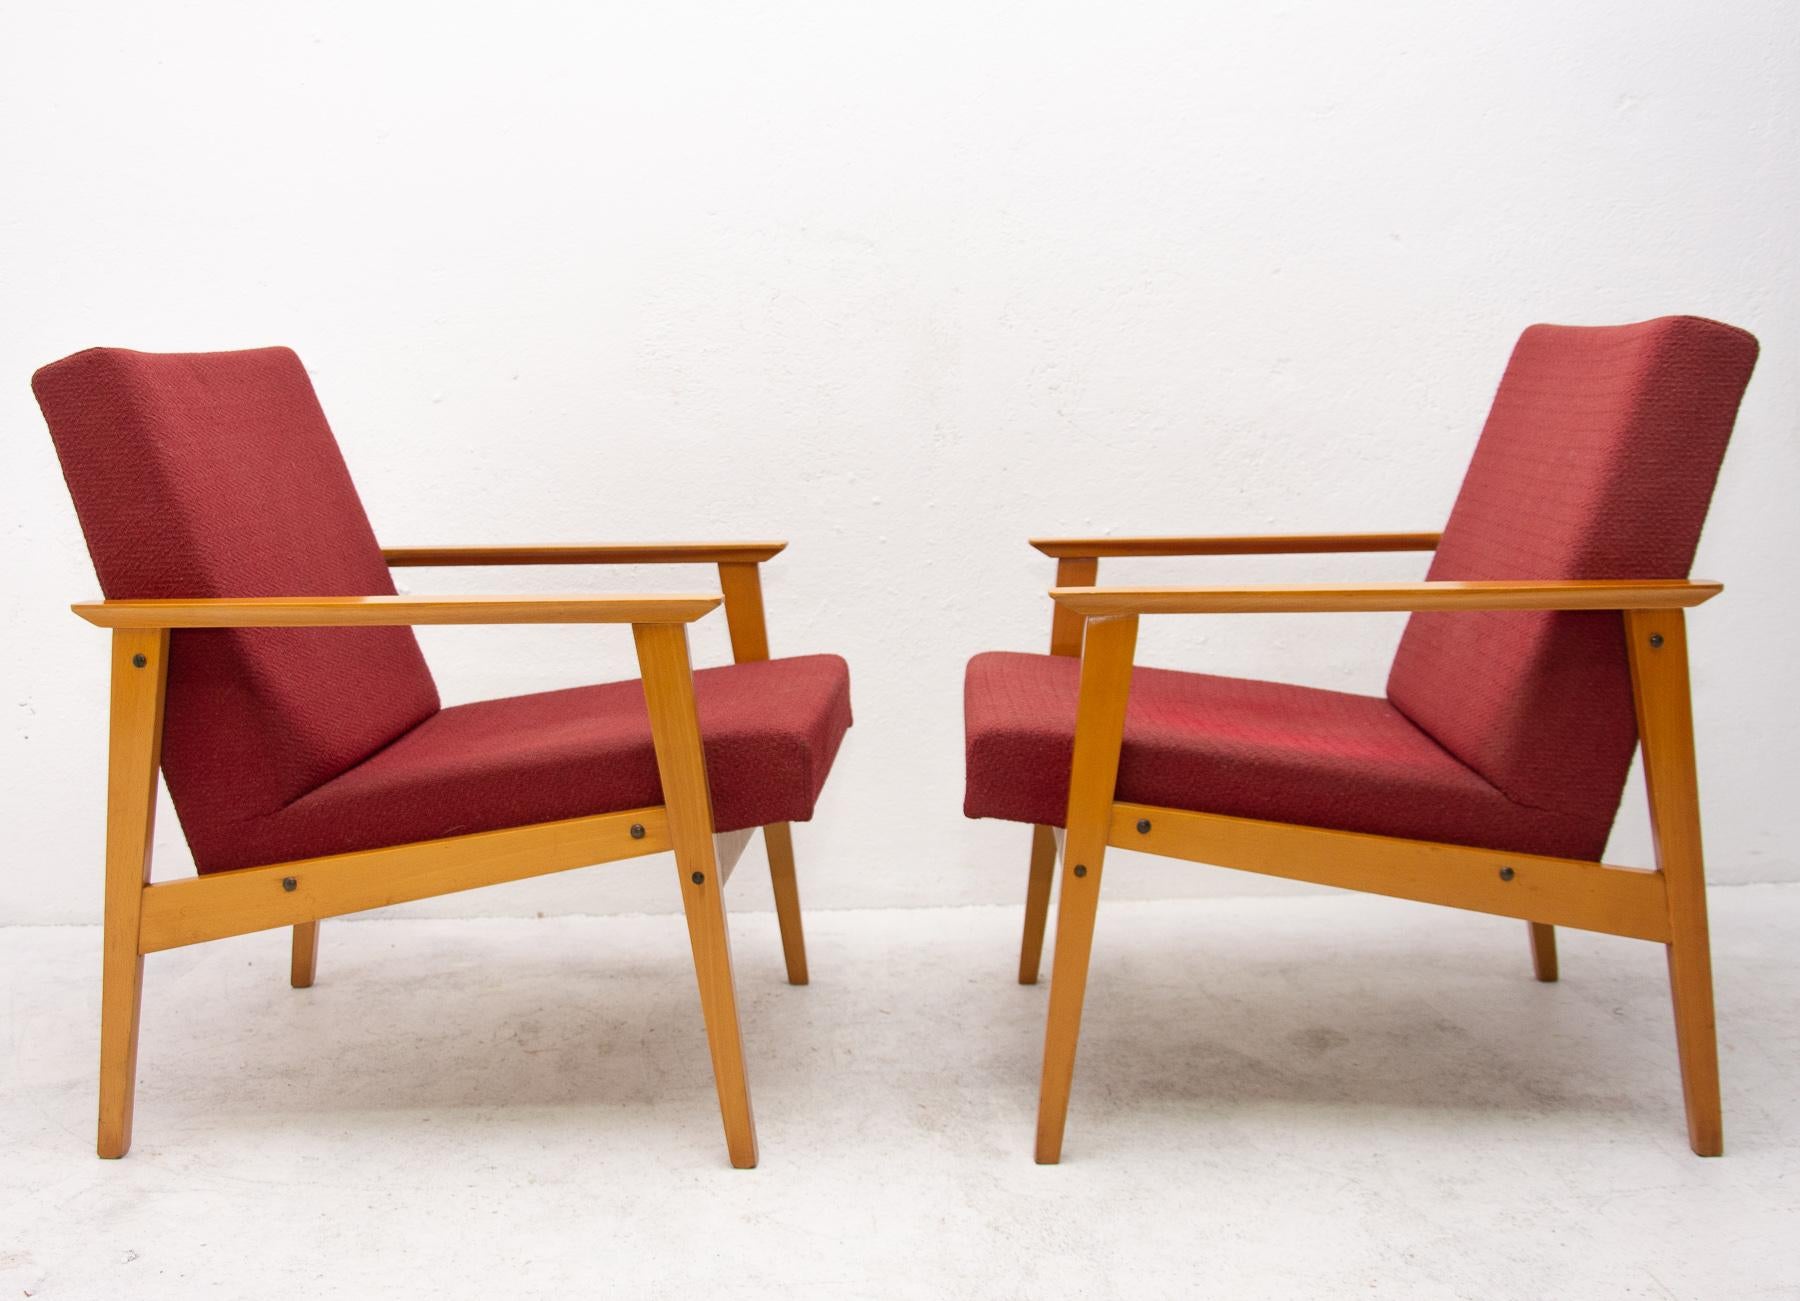 A pair of armchairs in Danish style, made in the former Czechoslovakia in the 1960s. The chairs were produced by TON Bystrice pod Hostýnem company( Thonet successor in Czechoslovakia) The structure is made of beech wood and the chairs has original